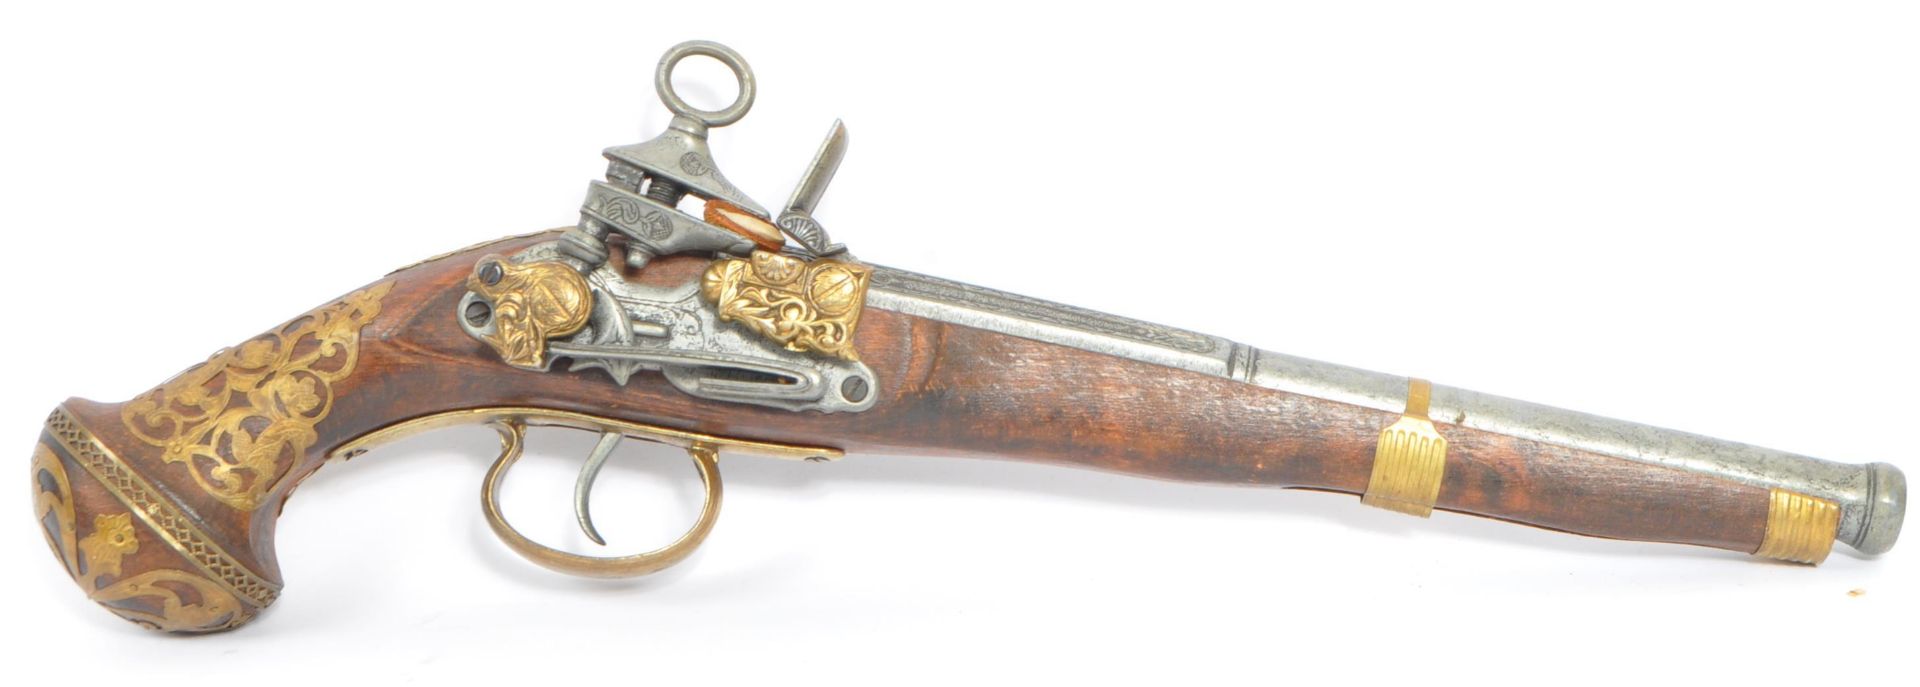 COLLECTION OF SIX REPRODUCTION FLINTLOCK 18TH CENTURY PISTOLS - Image 2 of 9